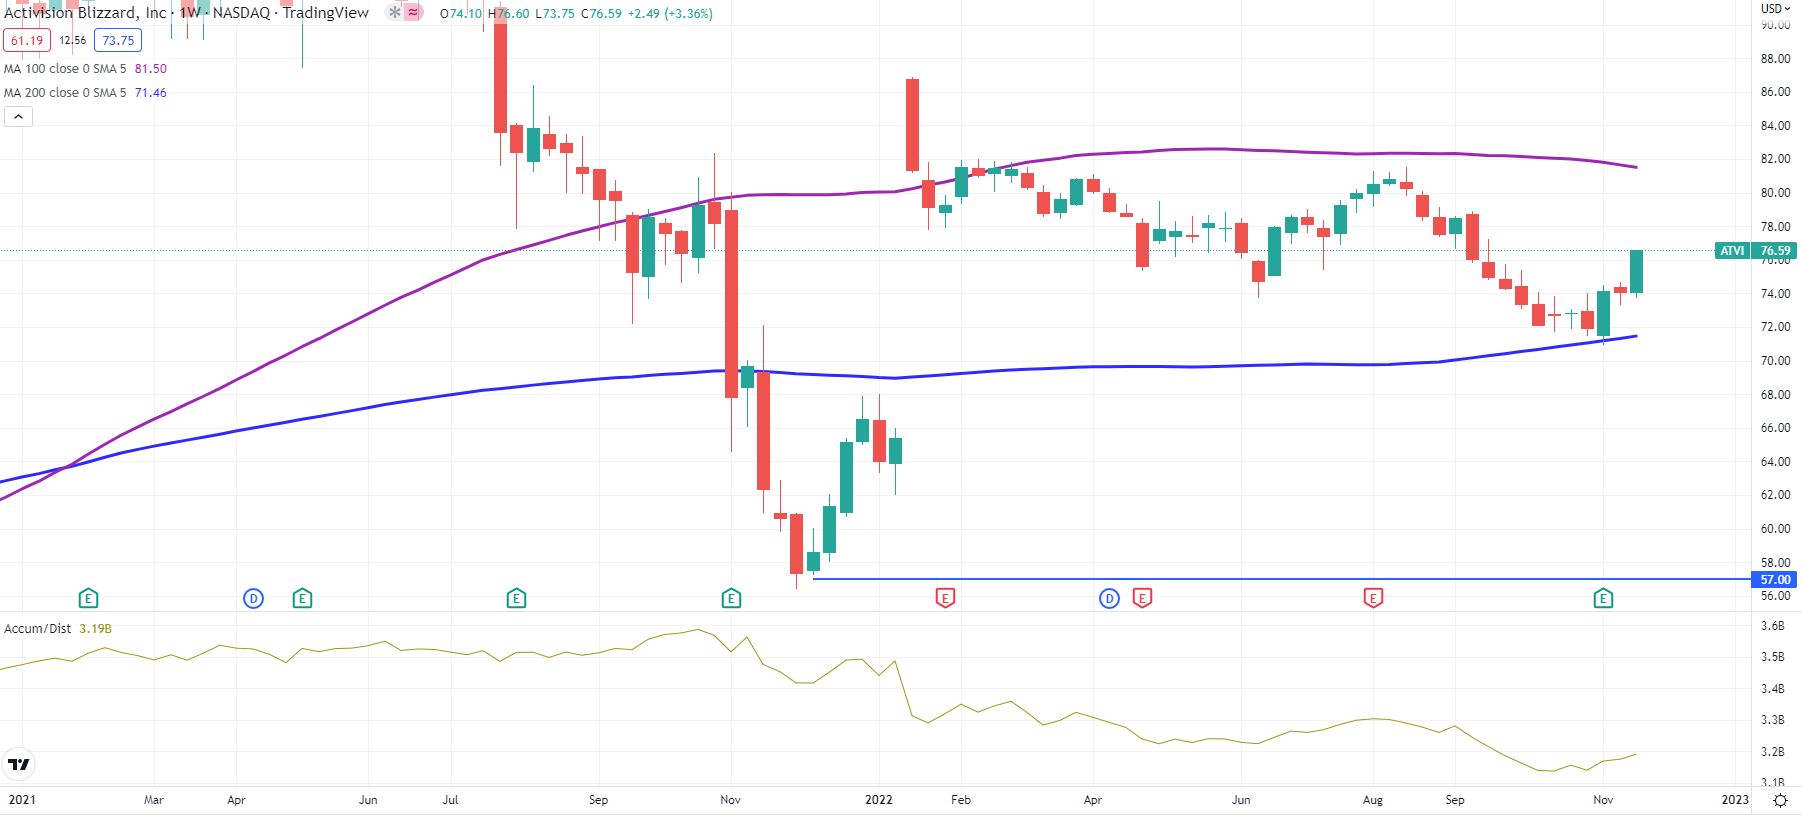 ATVI stock weekly chart shows risk of bearish trend continuation